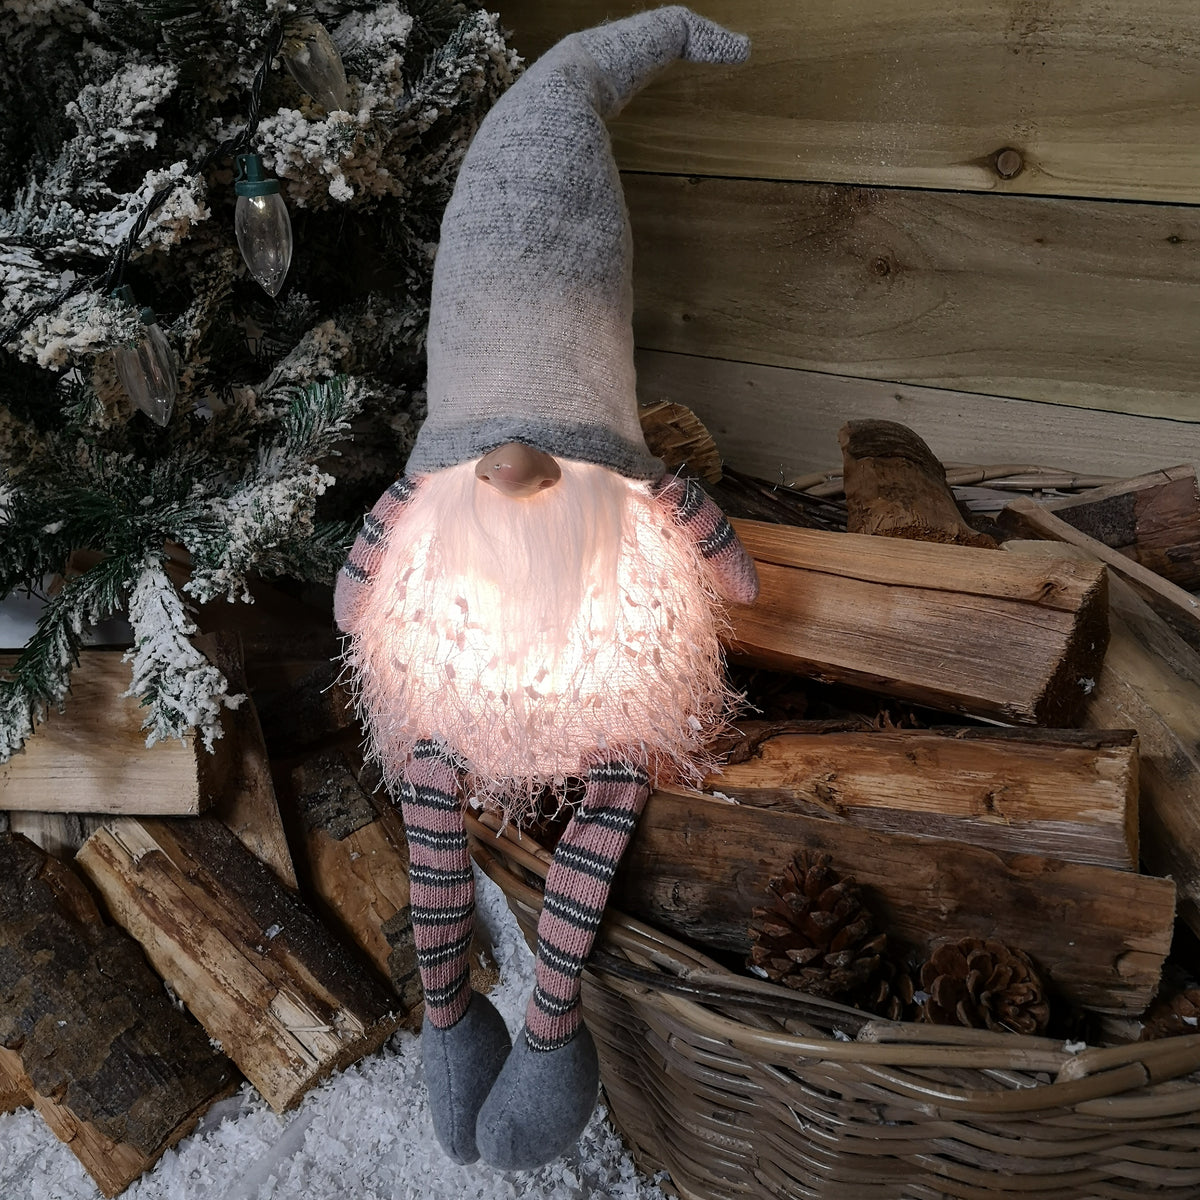 50cm Premier Christmas Sitting Male Light Up LED Gonk with Dangly Legs in Grey Hat